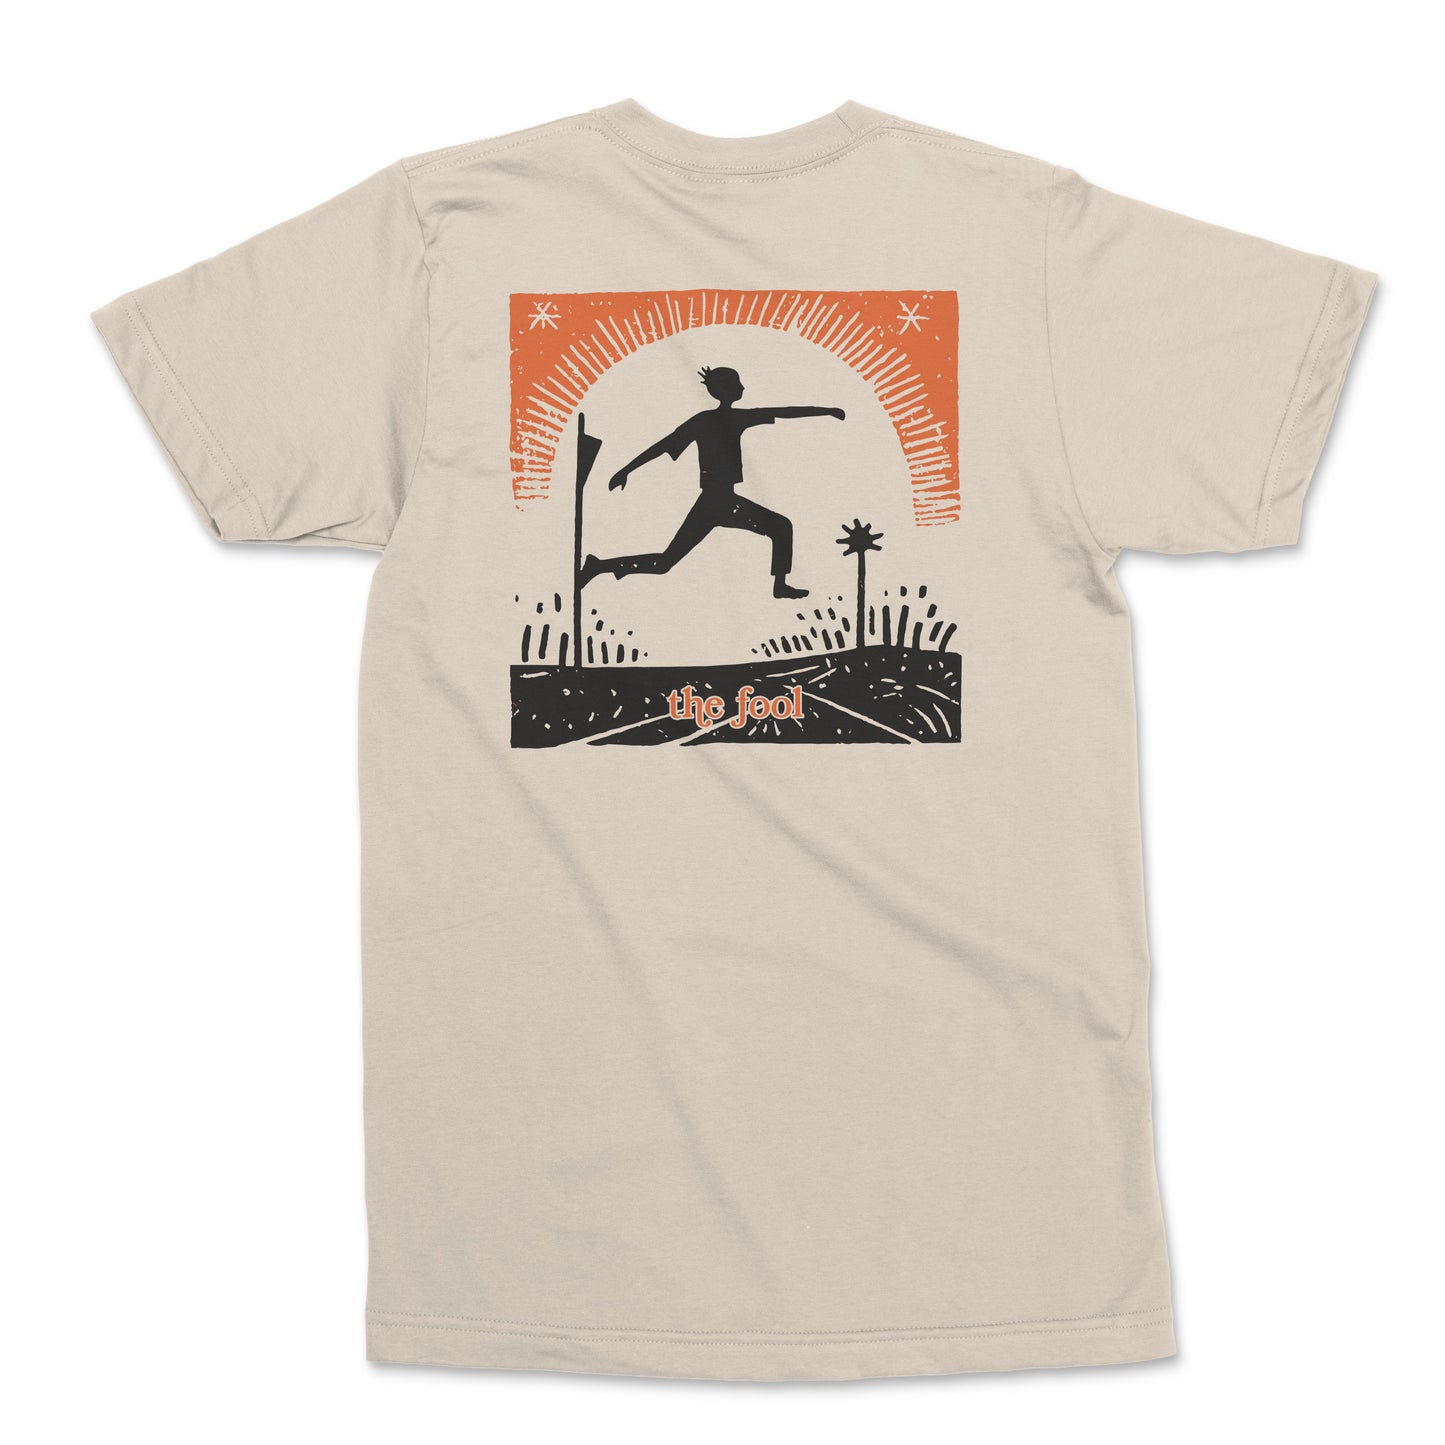 keep going - the fool - t-shirt